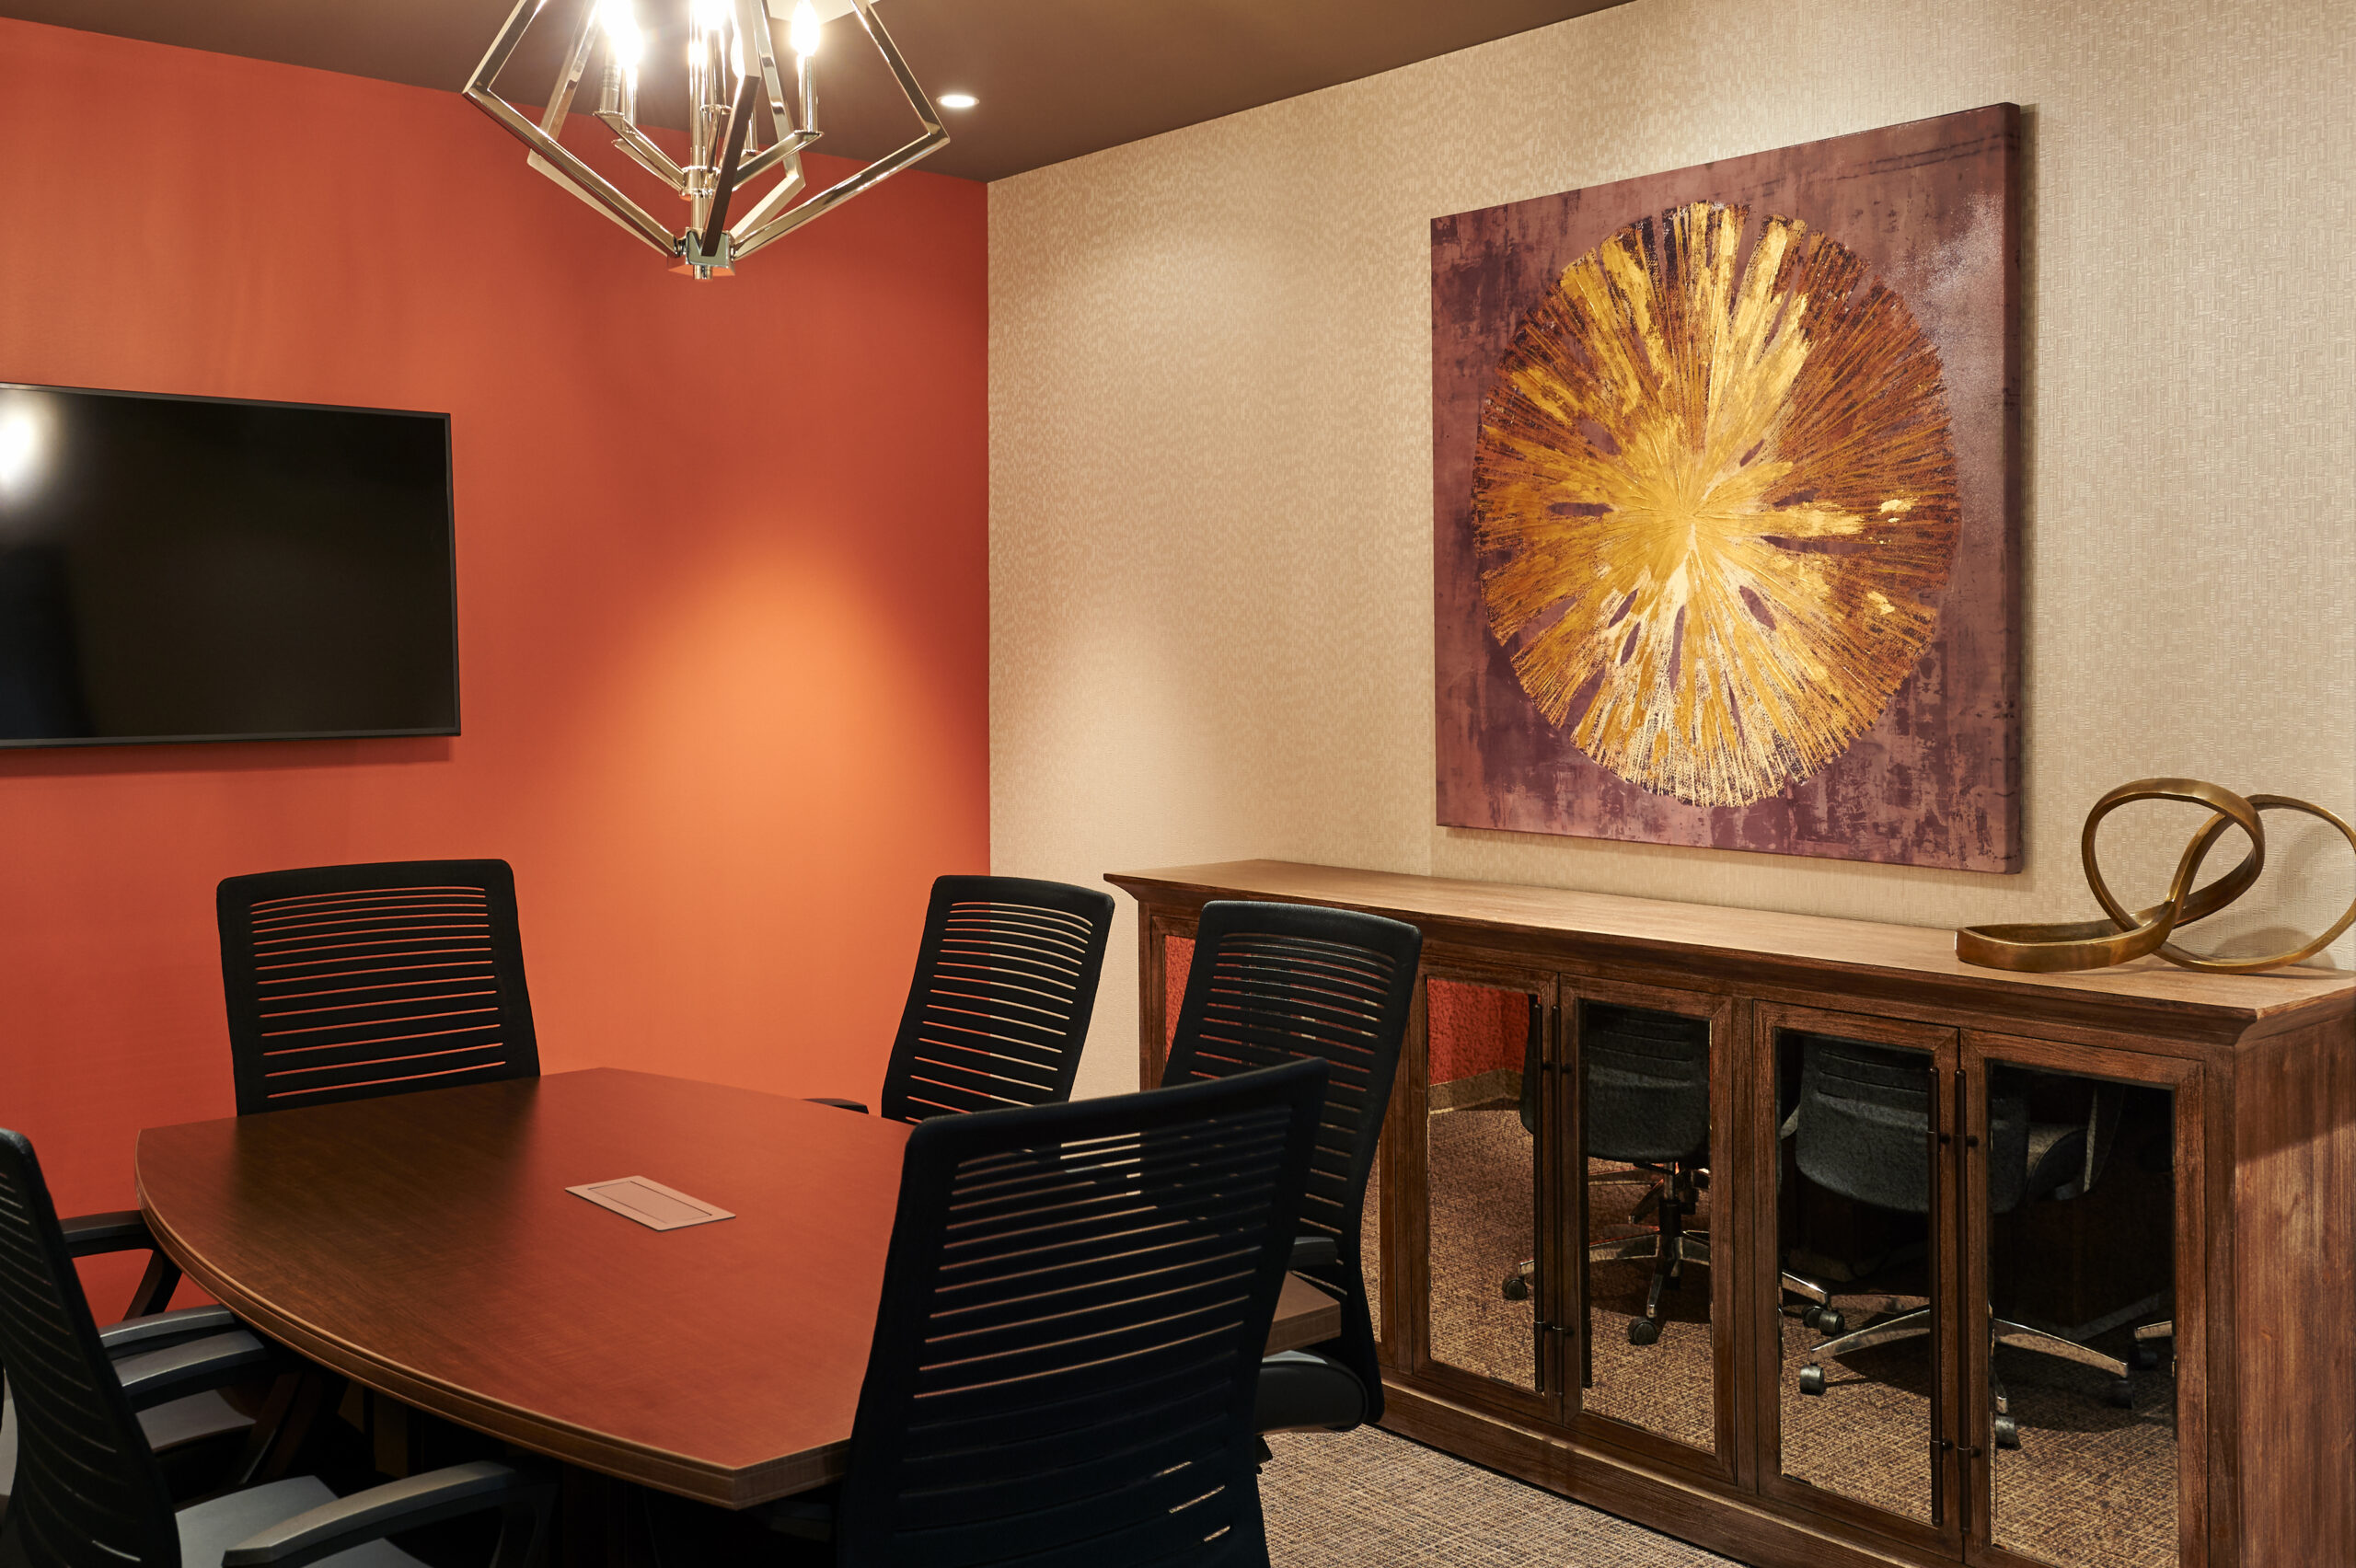 Our Hamilton, Ontario law firm boasts a contemporary conference room complete with a striking red accent wall, an intriguing abstract piece of art, and a state-of-the-art flat-screen TV.